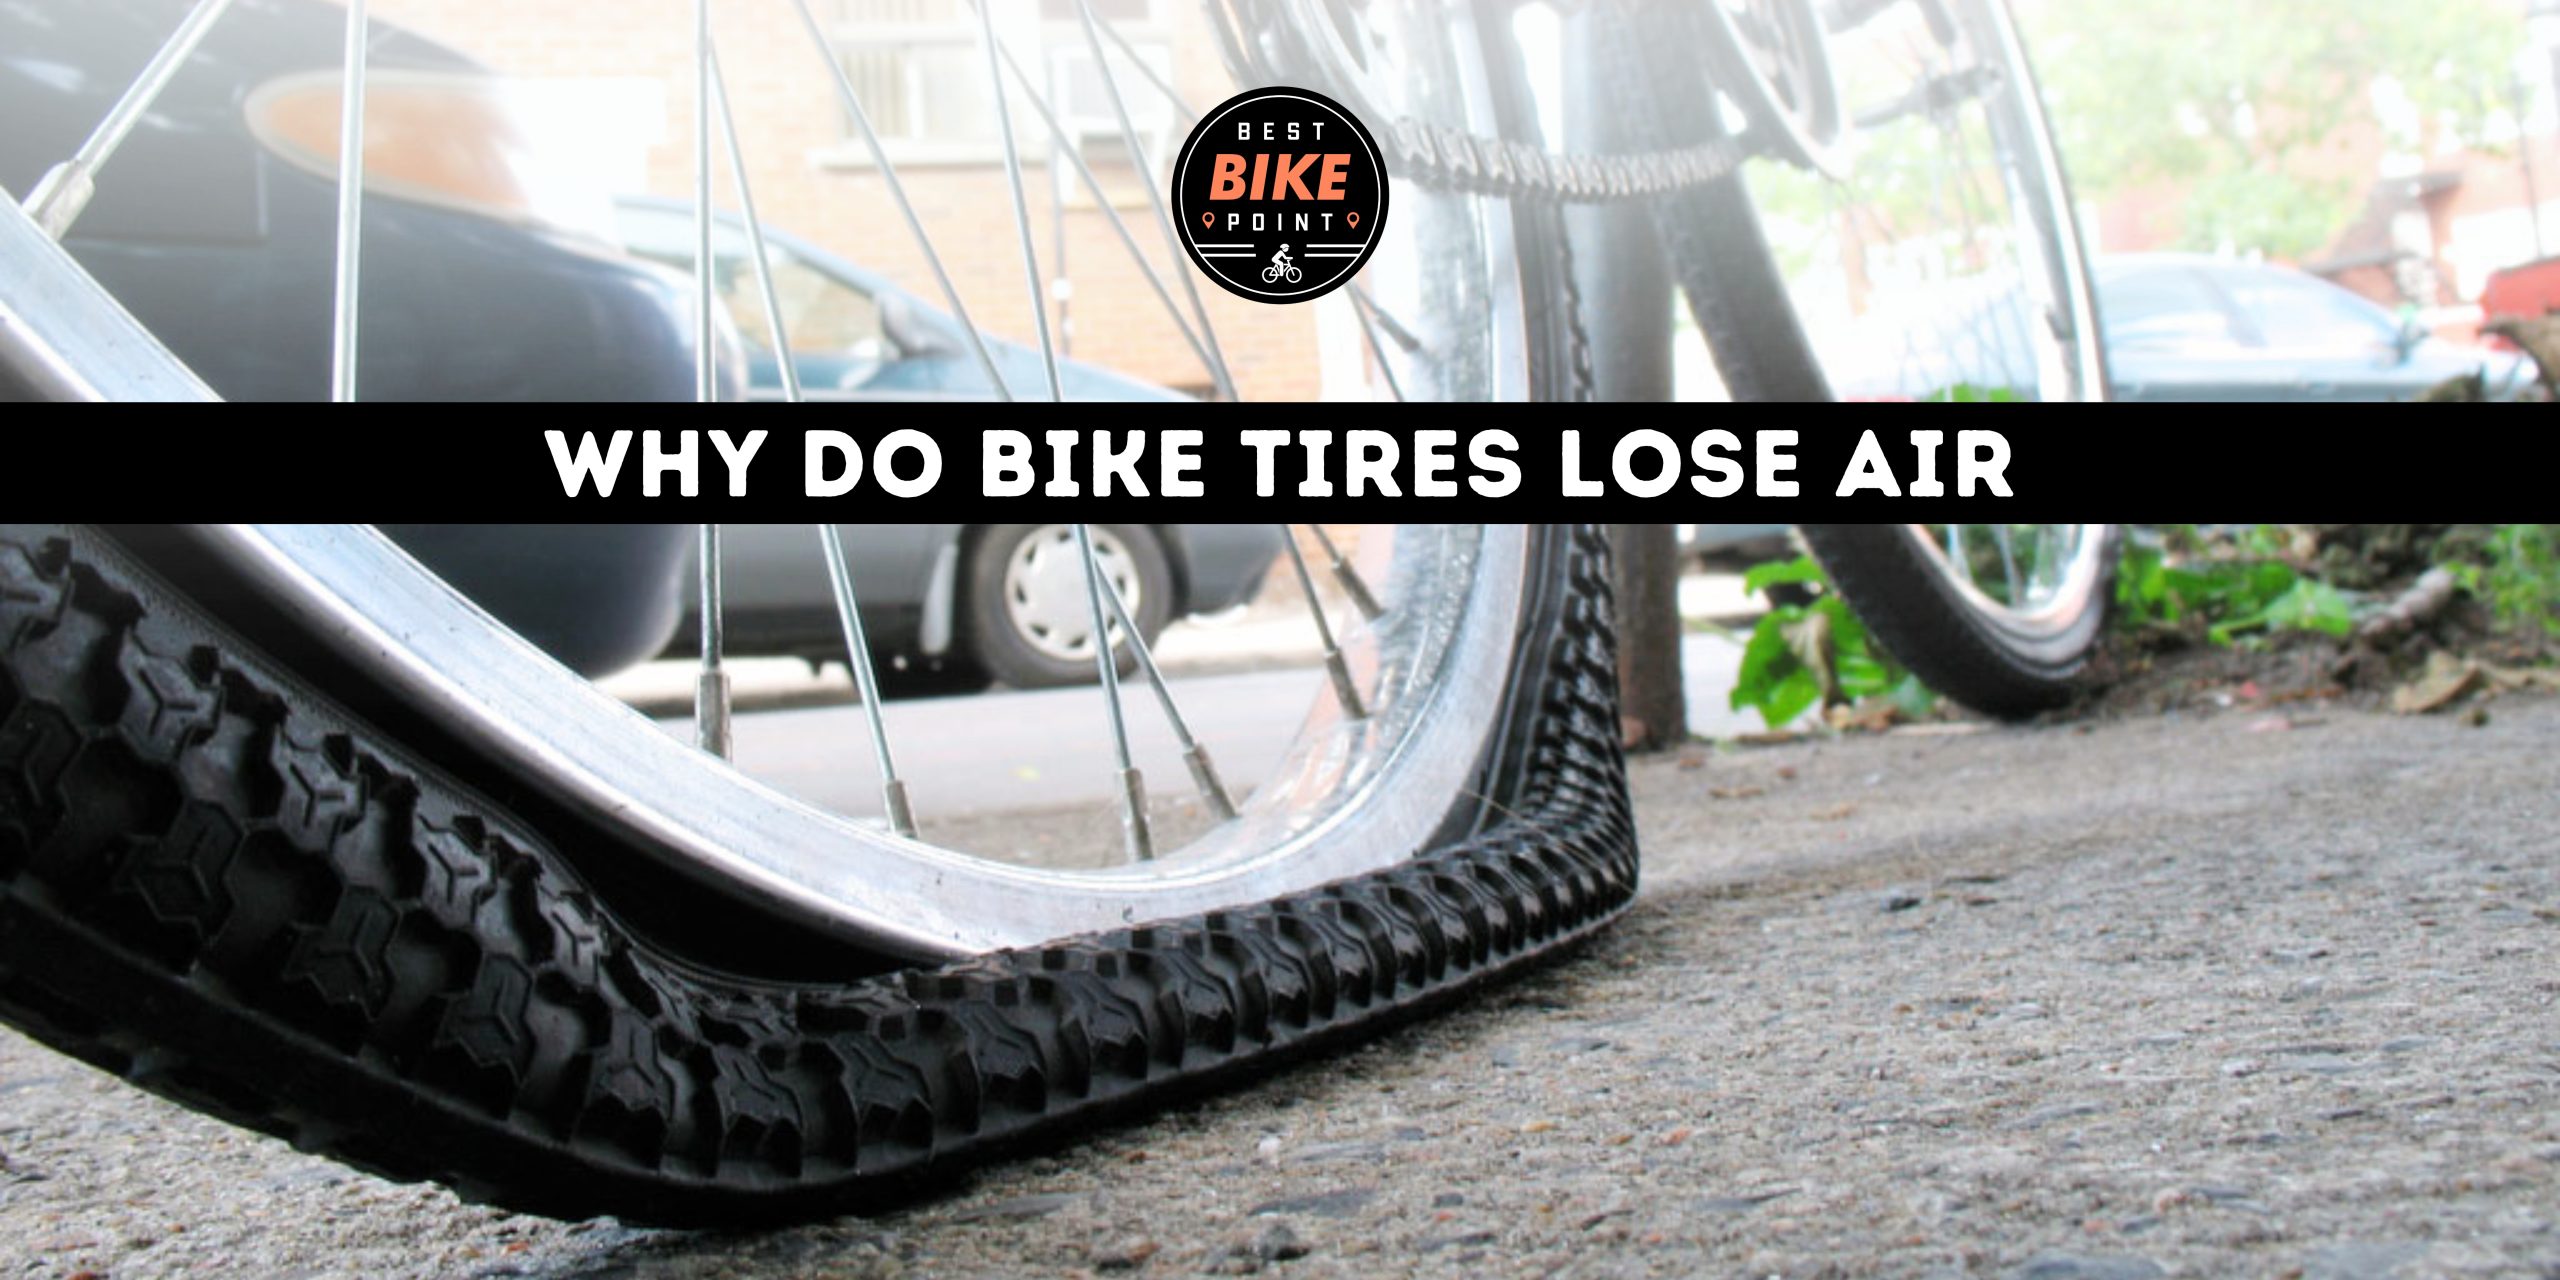 Why Do Bike Tires Lose Air?